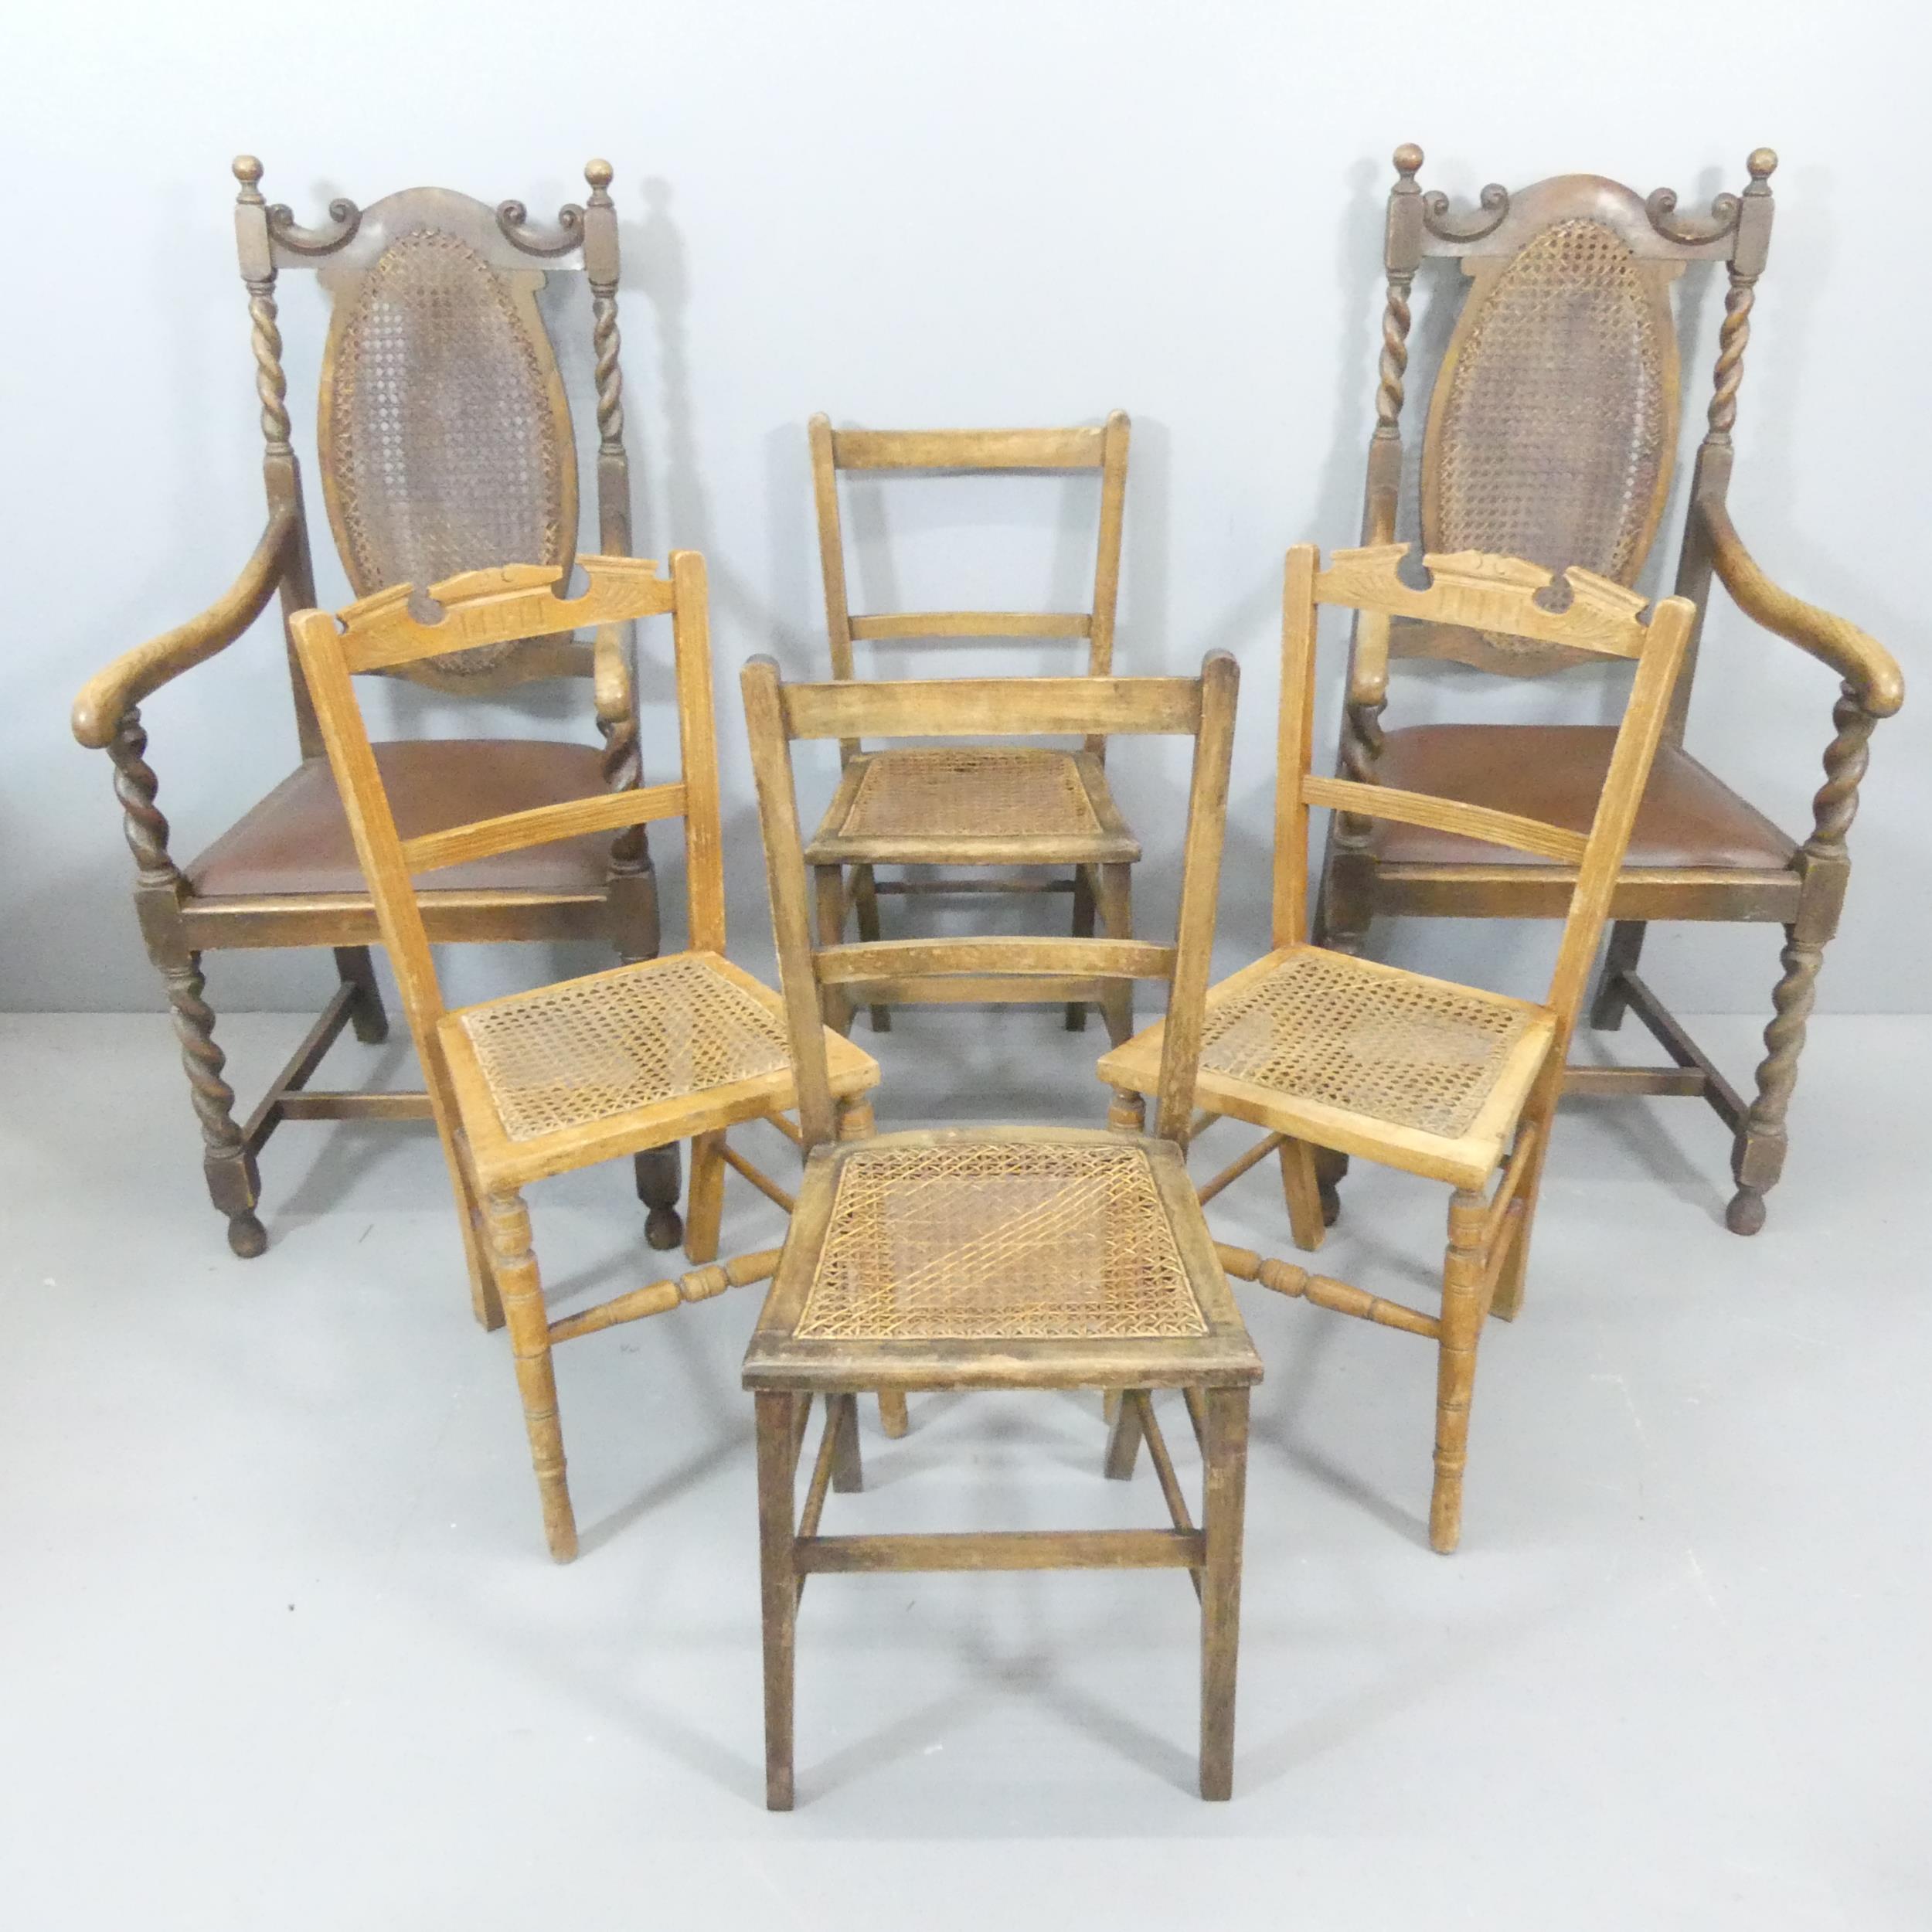 A pair of Jacobean style cane backed open arm chairs, and two pairs of cane seated dining chairs. (